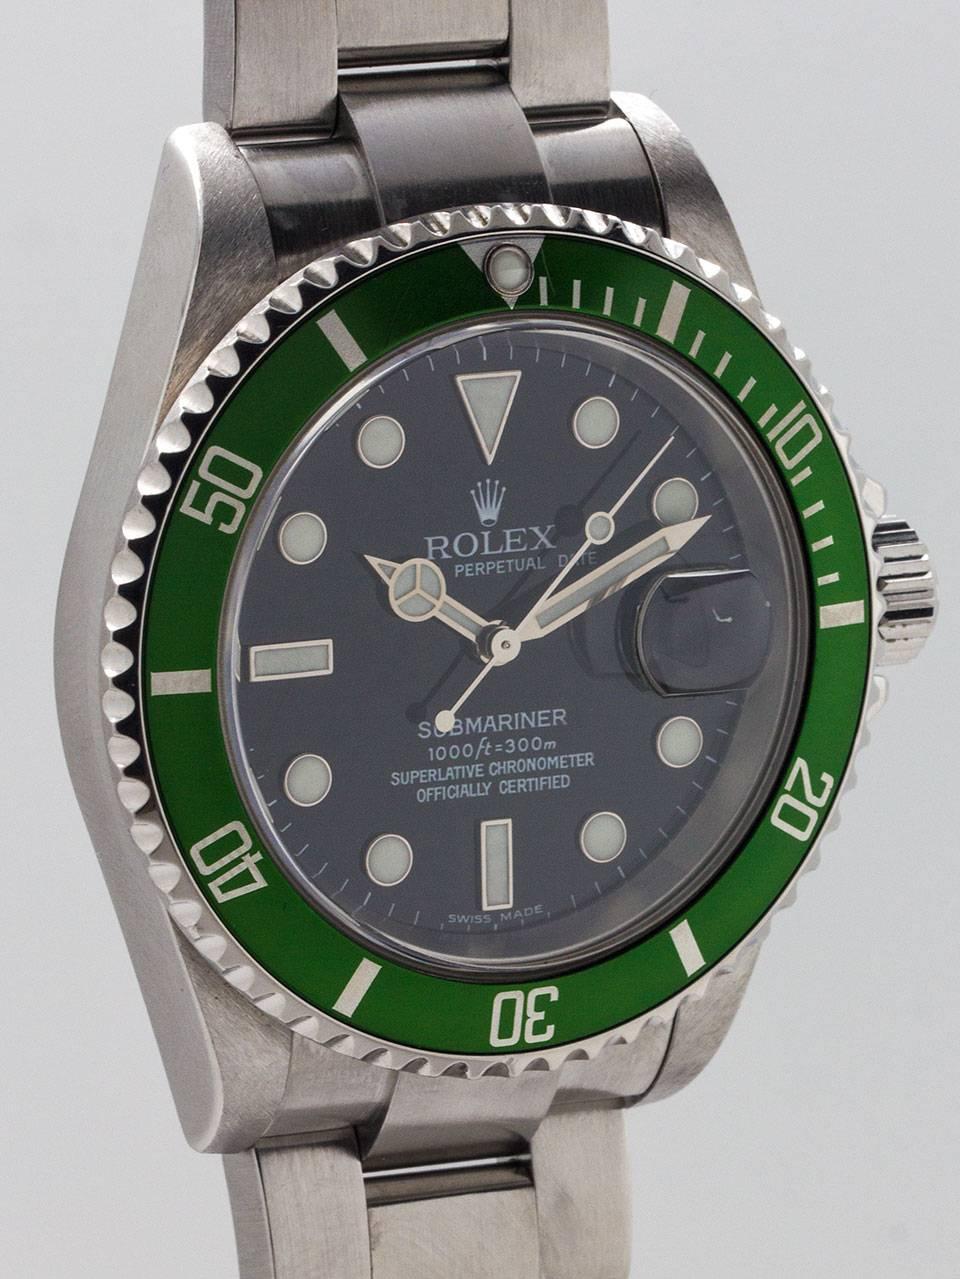 Rolex Stainless Steel Anniversary Submariner ref 16610T, first generation F3 serial number, circa 2003. Made in honor of 50 years production of the Rolex Submariner.  40mm diameter case with sapphire crystal and first generation emerald green bezel